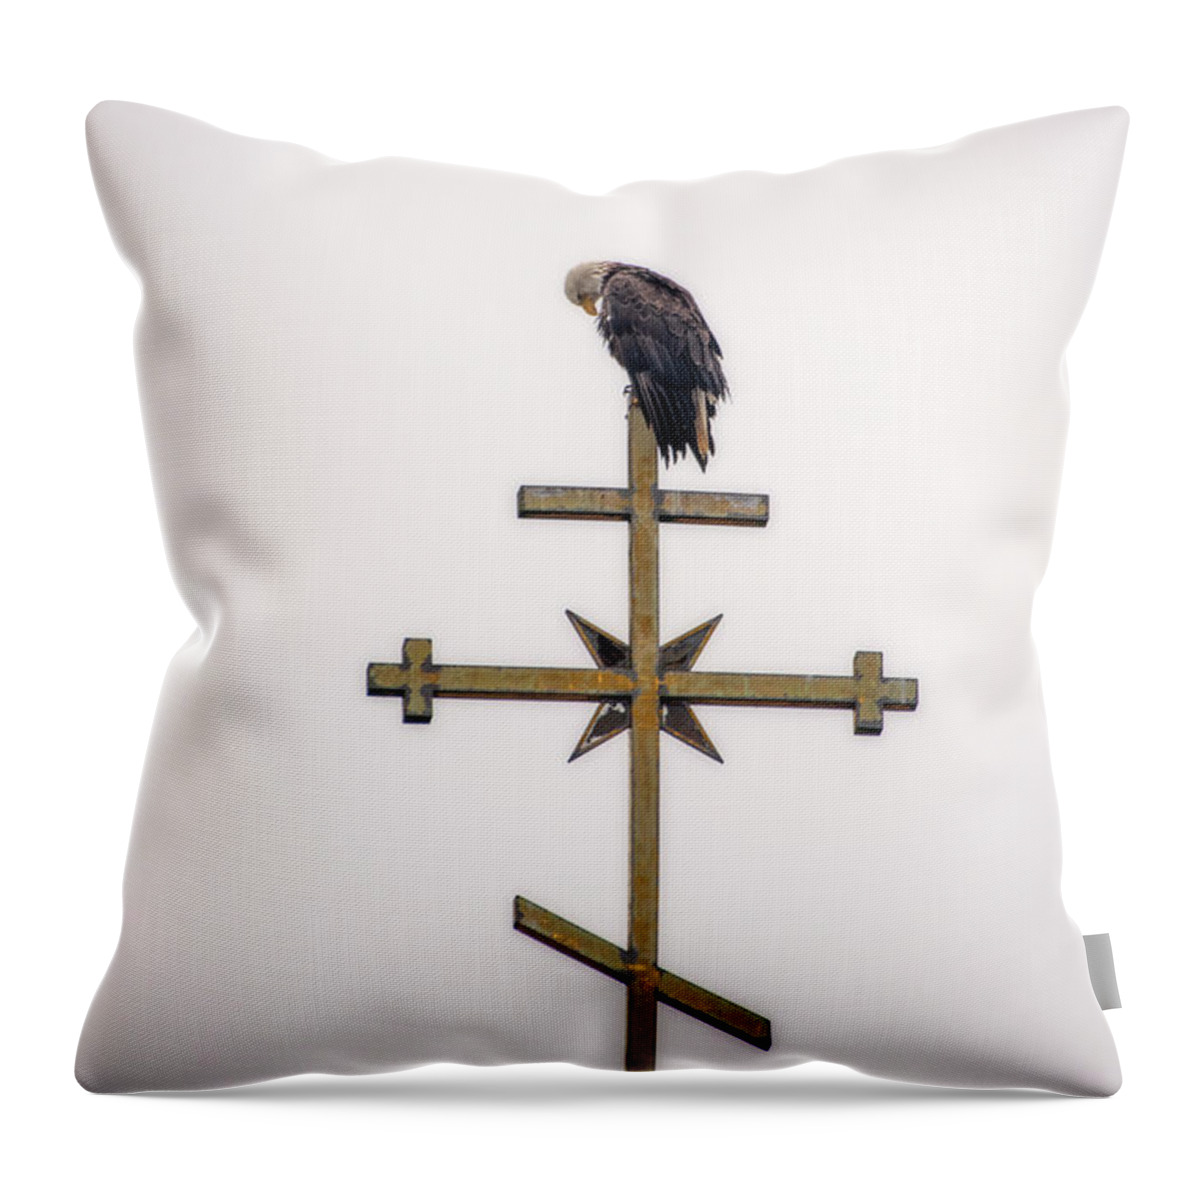 Praying Throw Pillow featuring the photograph Praying Eagle by Robert J Wagner